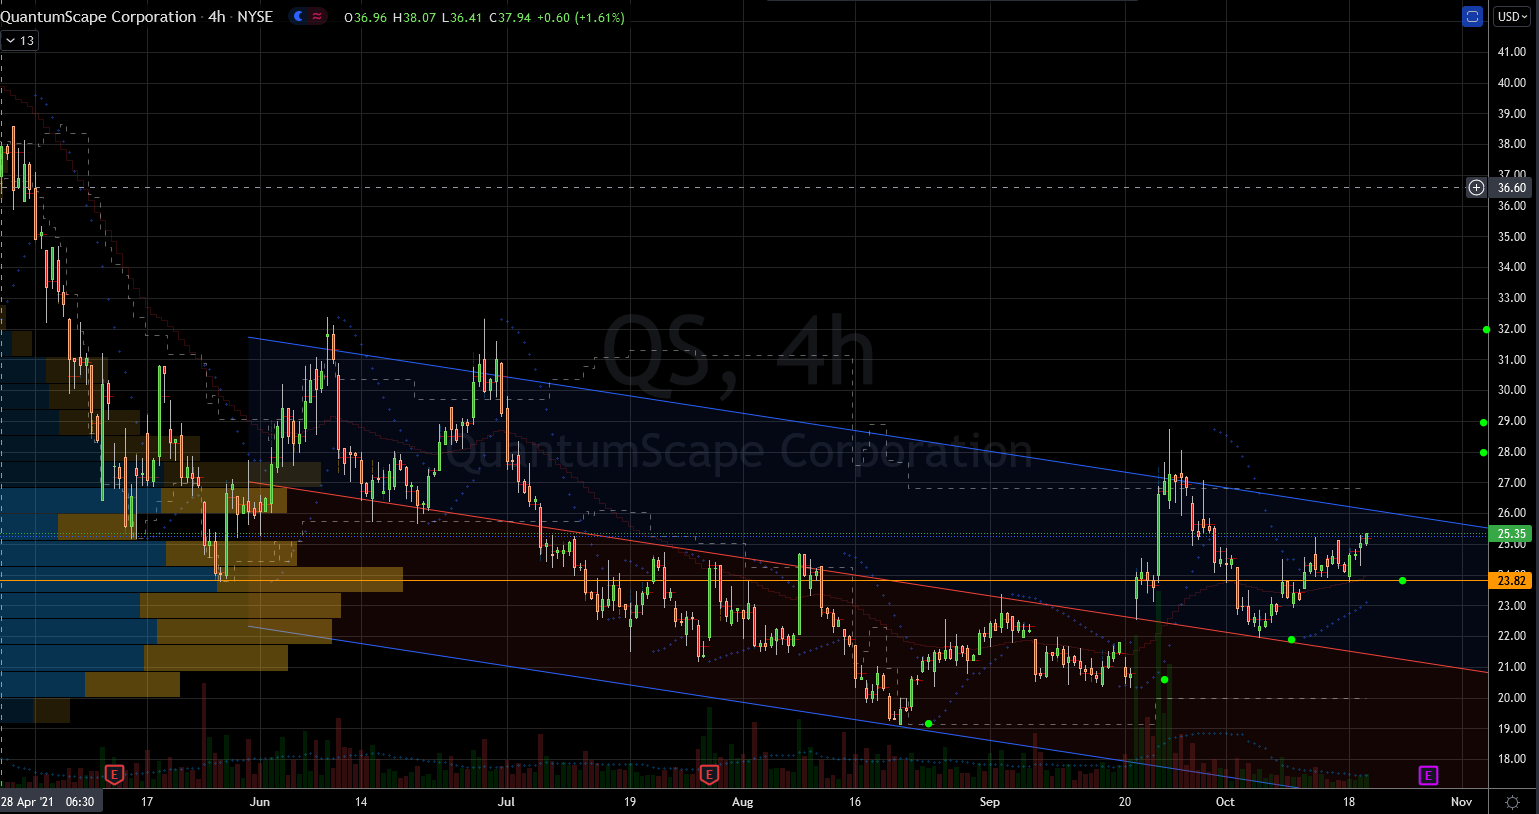 QuantumScape (QS) Stock Chart Showing Improvement Off the Lows